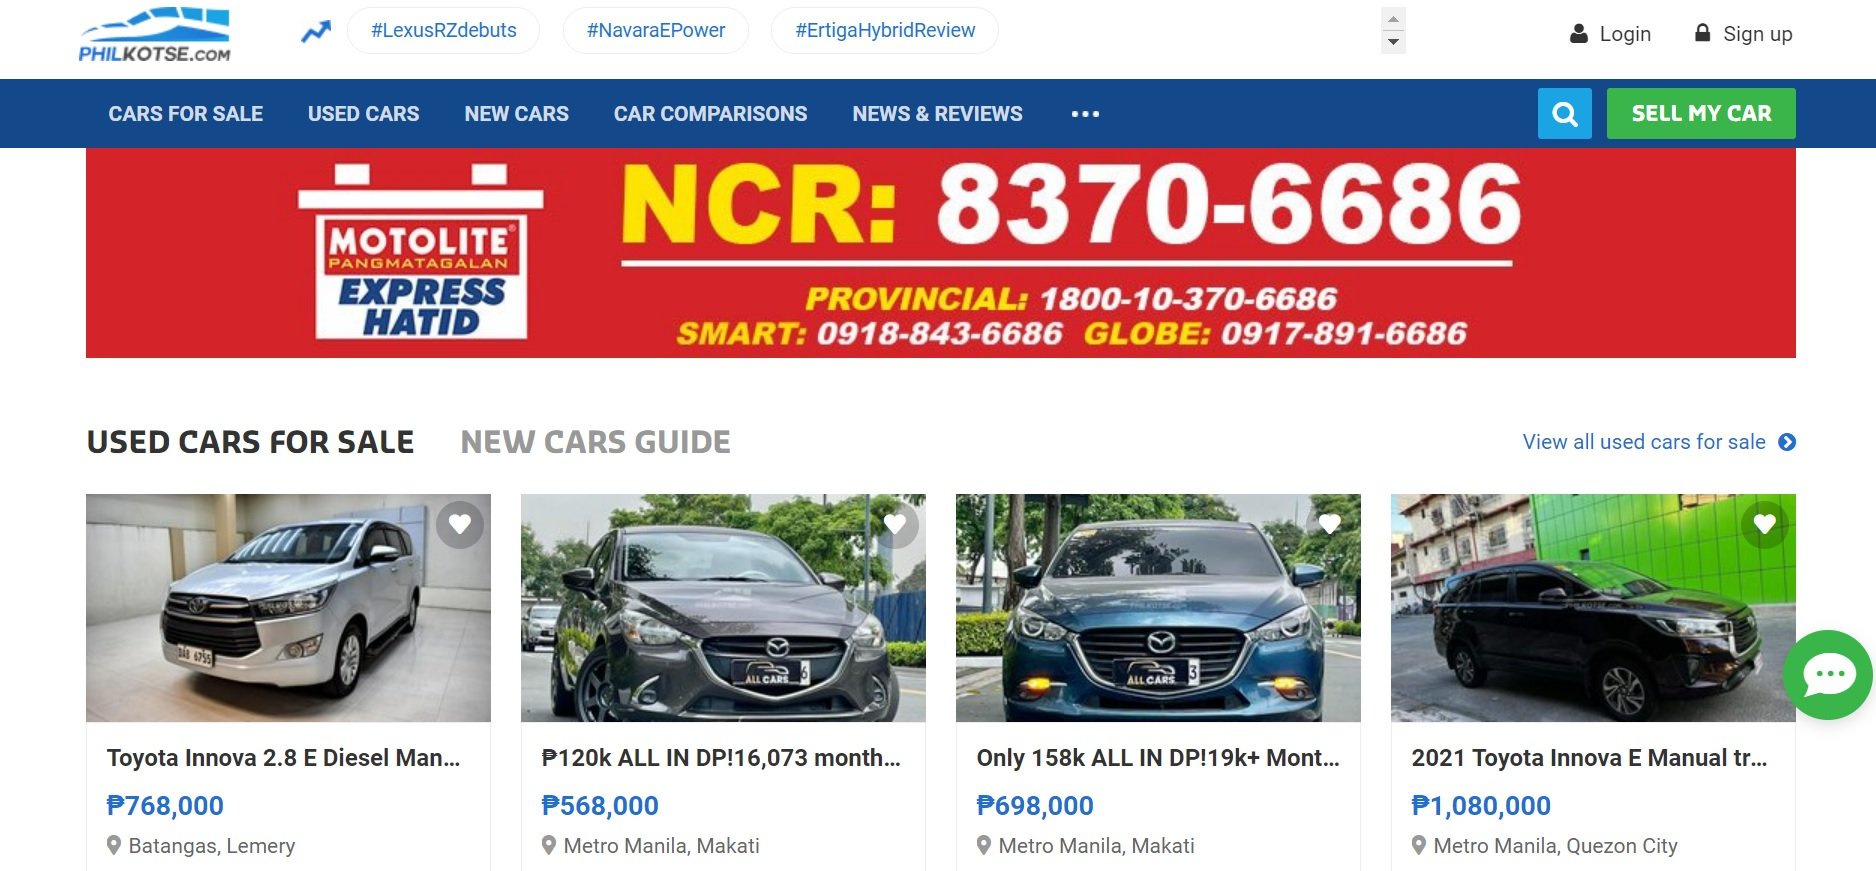 where to buy second-hand cars philippines - philkotse